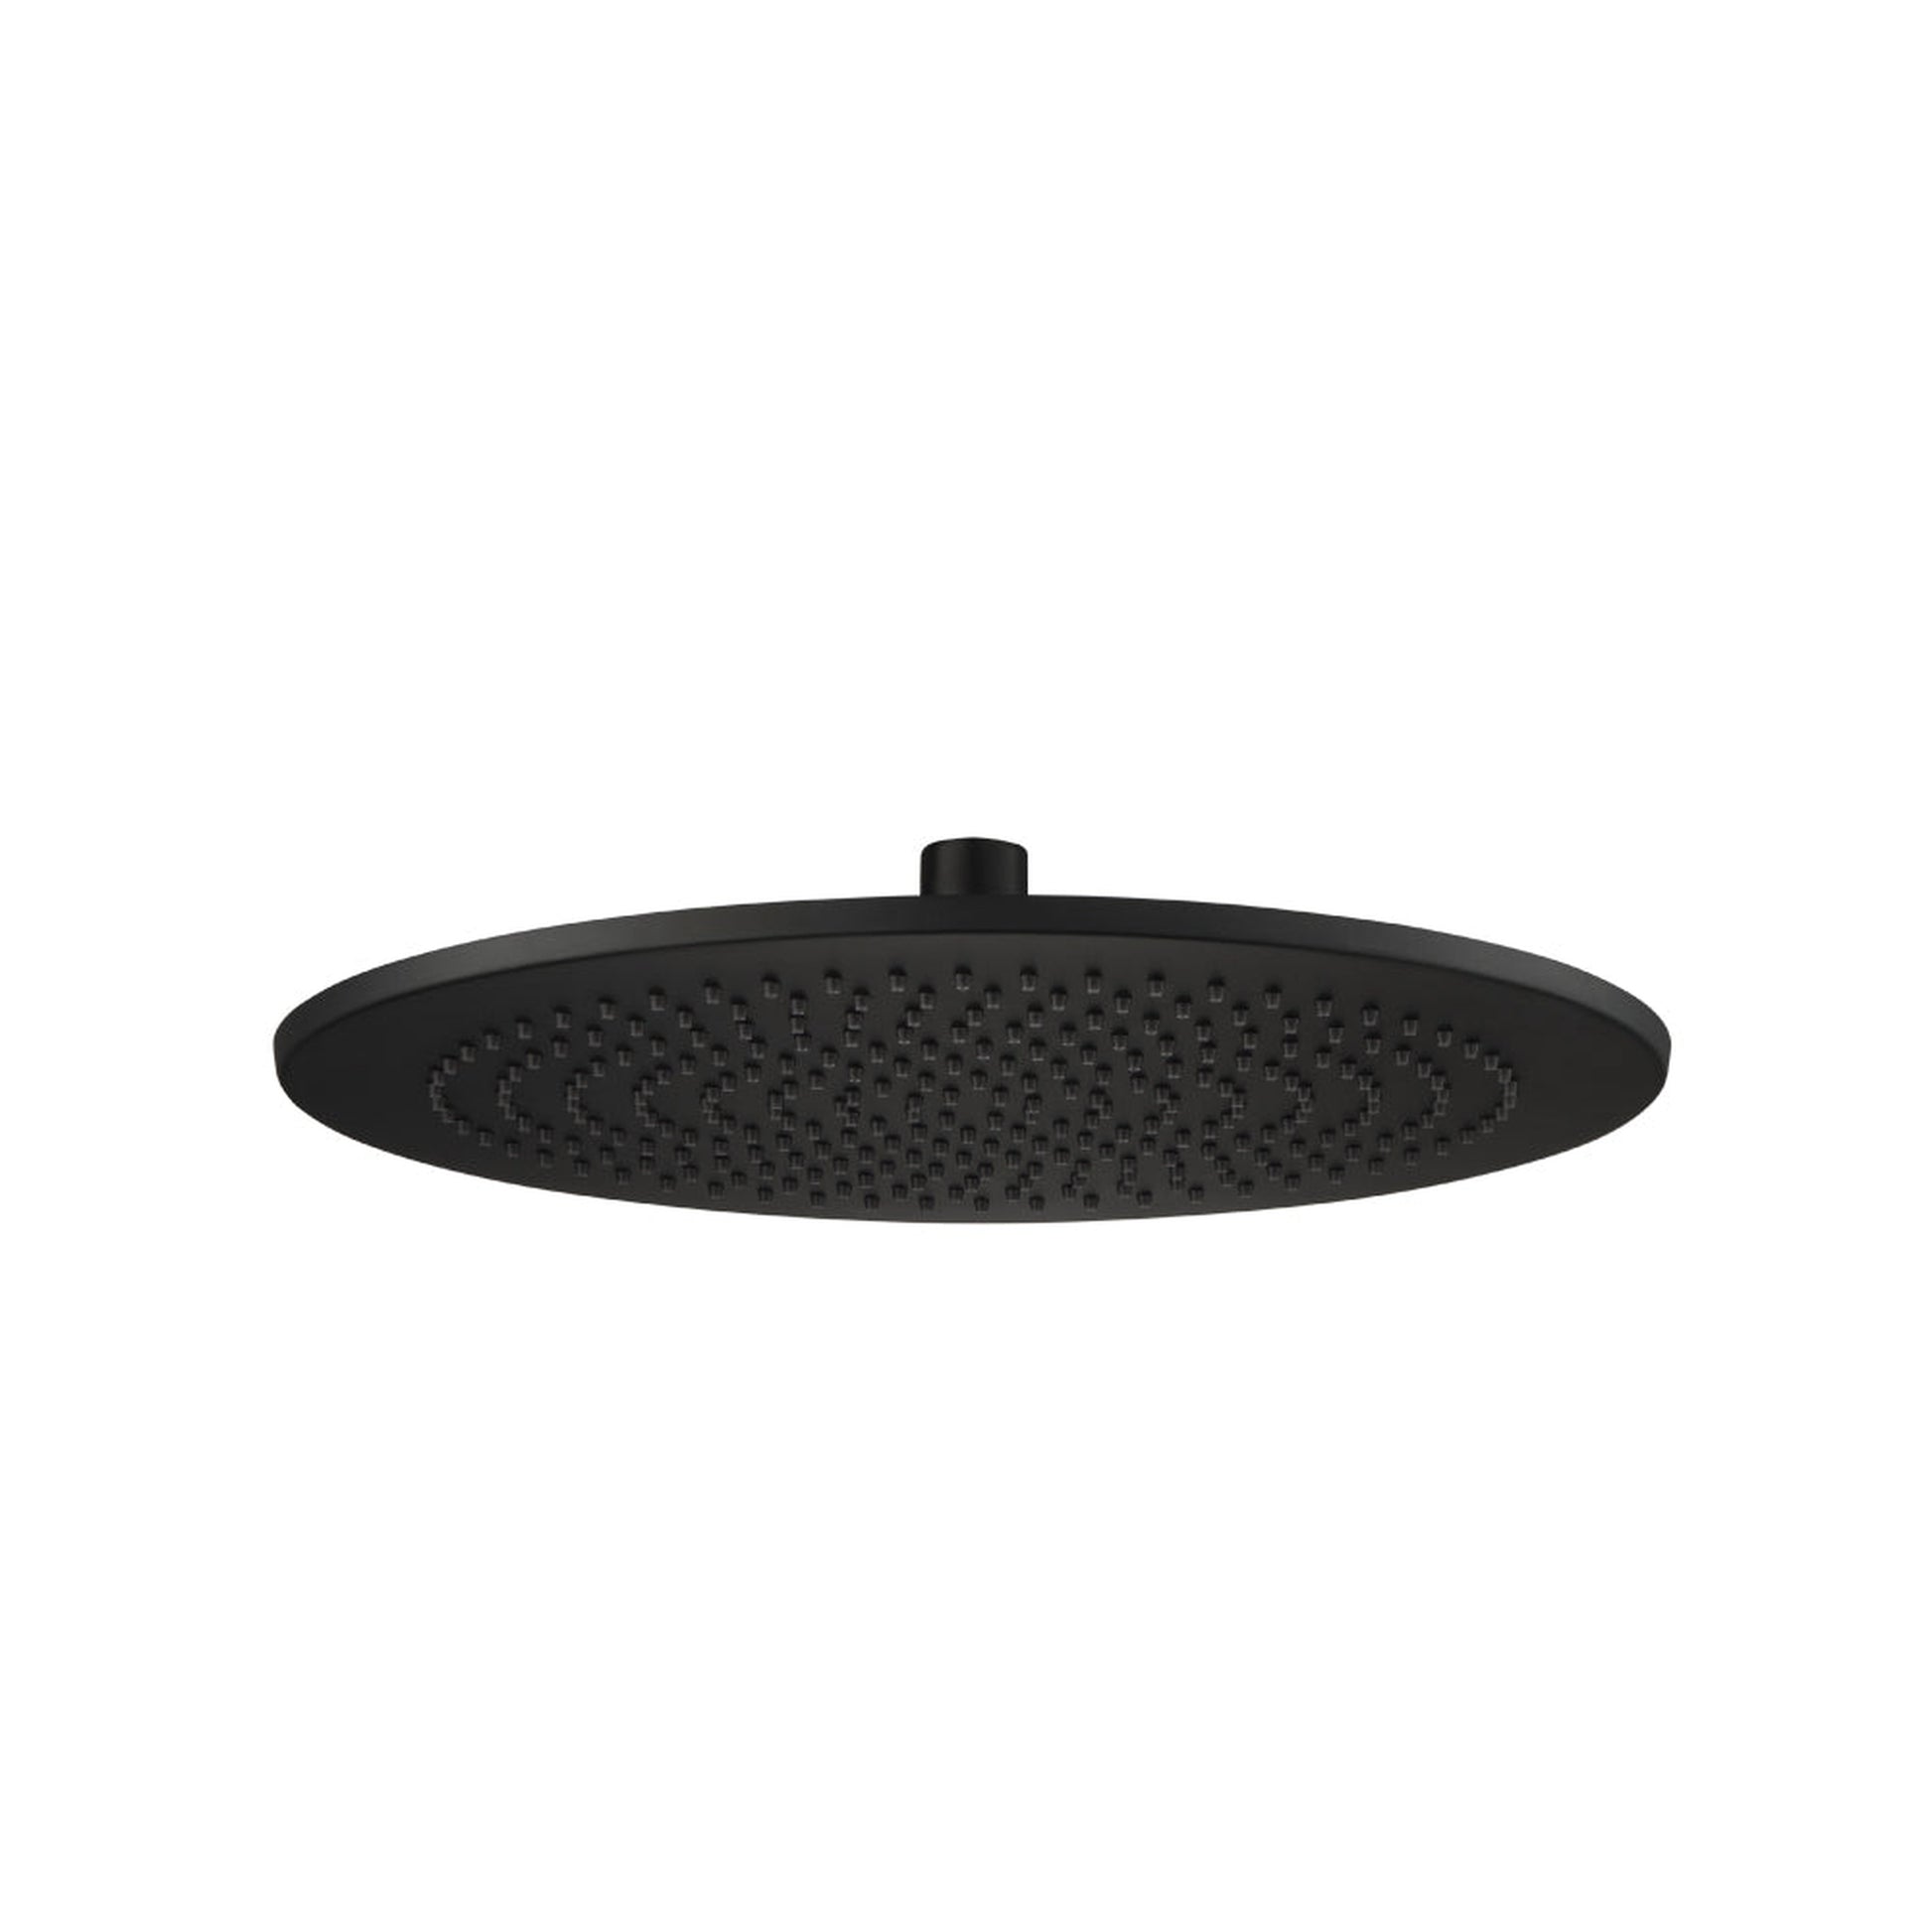 Isenberg Universal Fixtures 12" Single Function Round Matte Black Solid Brass Rain Shower Head With 15" Wall Mounted Shower Arm